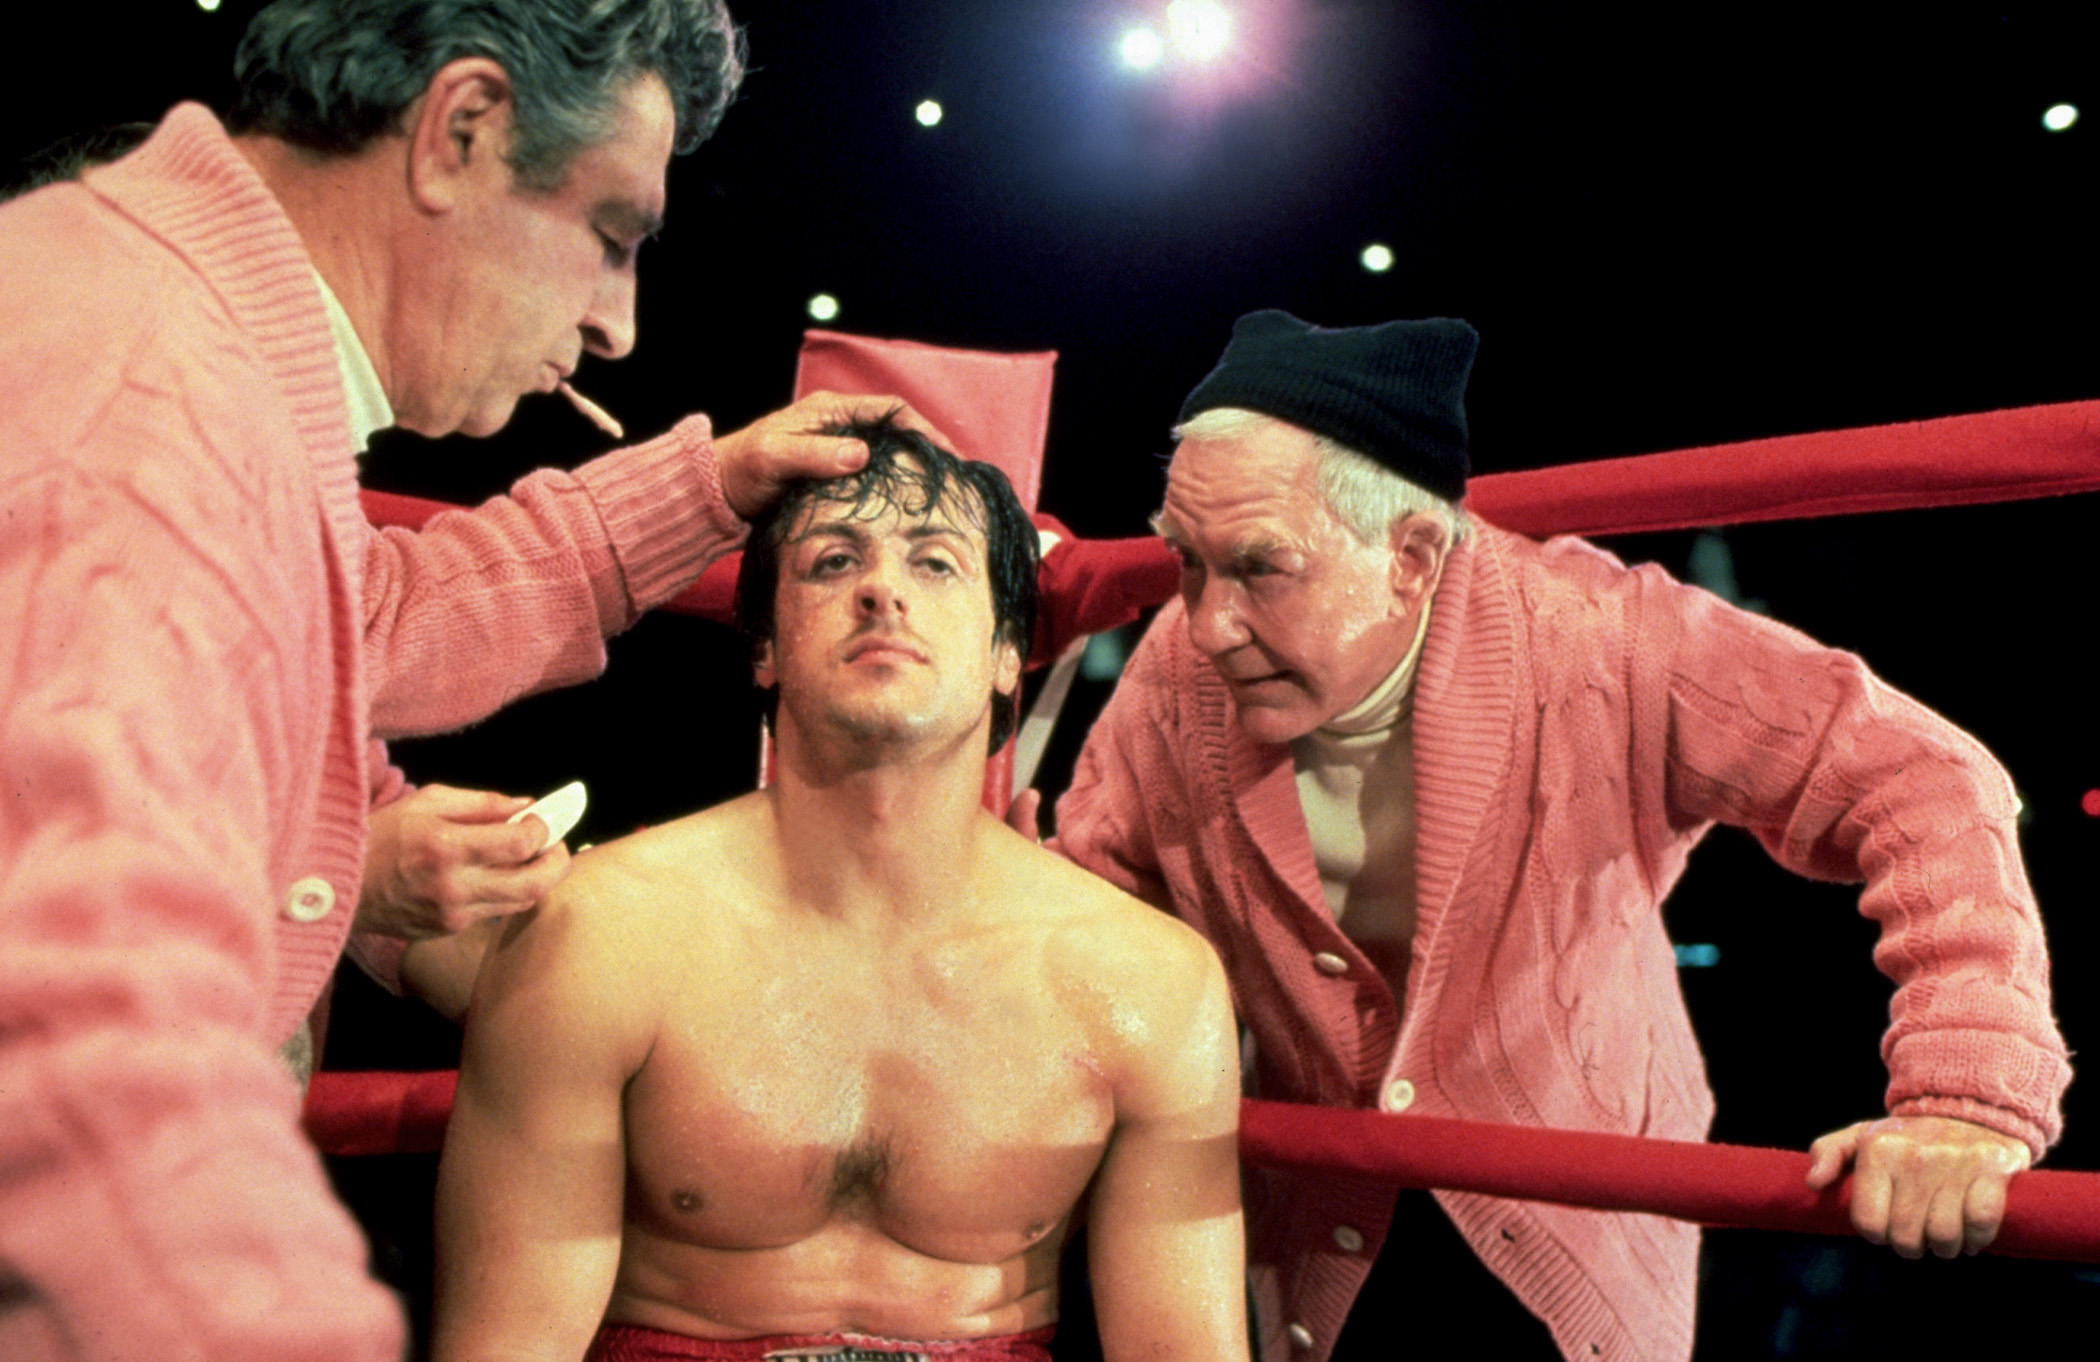 Sylvester Stallone as Rocky with trainer and cutman in boxing ring during a break in a match from the movie &quot;Rocky&quot;